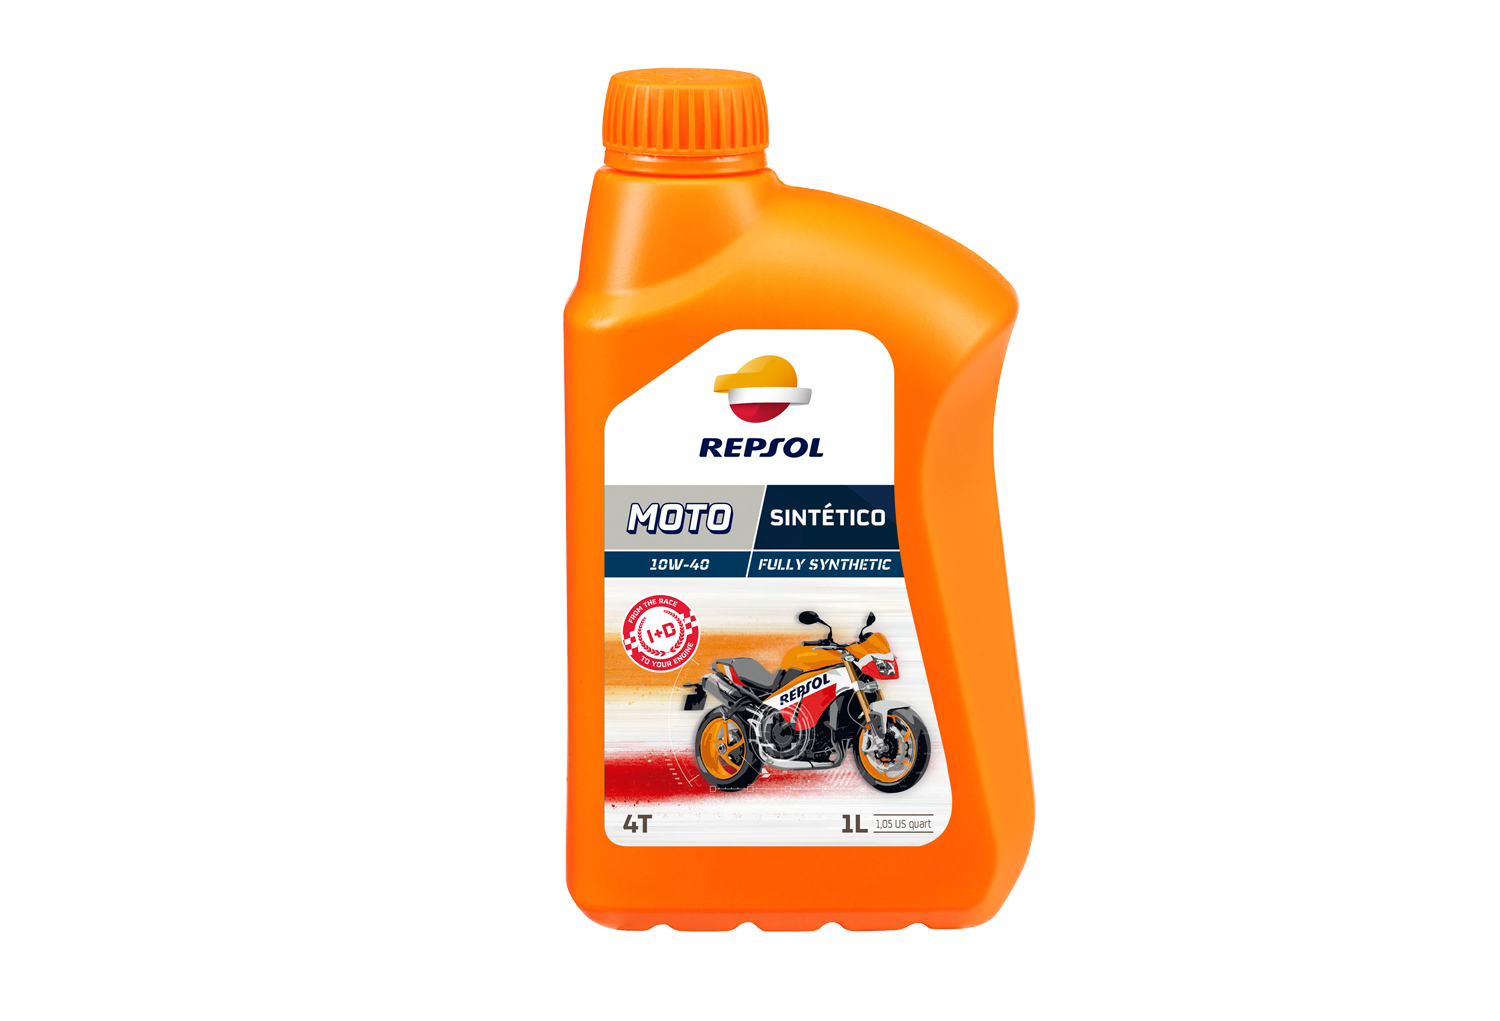 Motorbike масло 10w 40. Repsol Moto Scooter 2t. Repsol Racing 10w-40. Масло Repsol 10w 40 для мотоцикла. Repsol, масло Rp Moto Racing 4t 10w40, 1 л канистра.